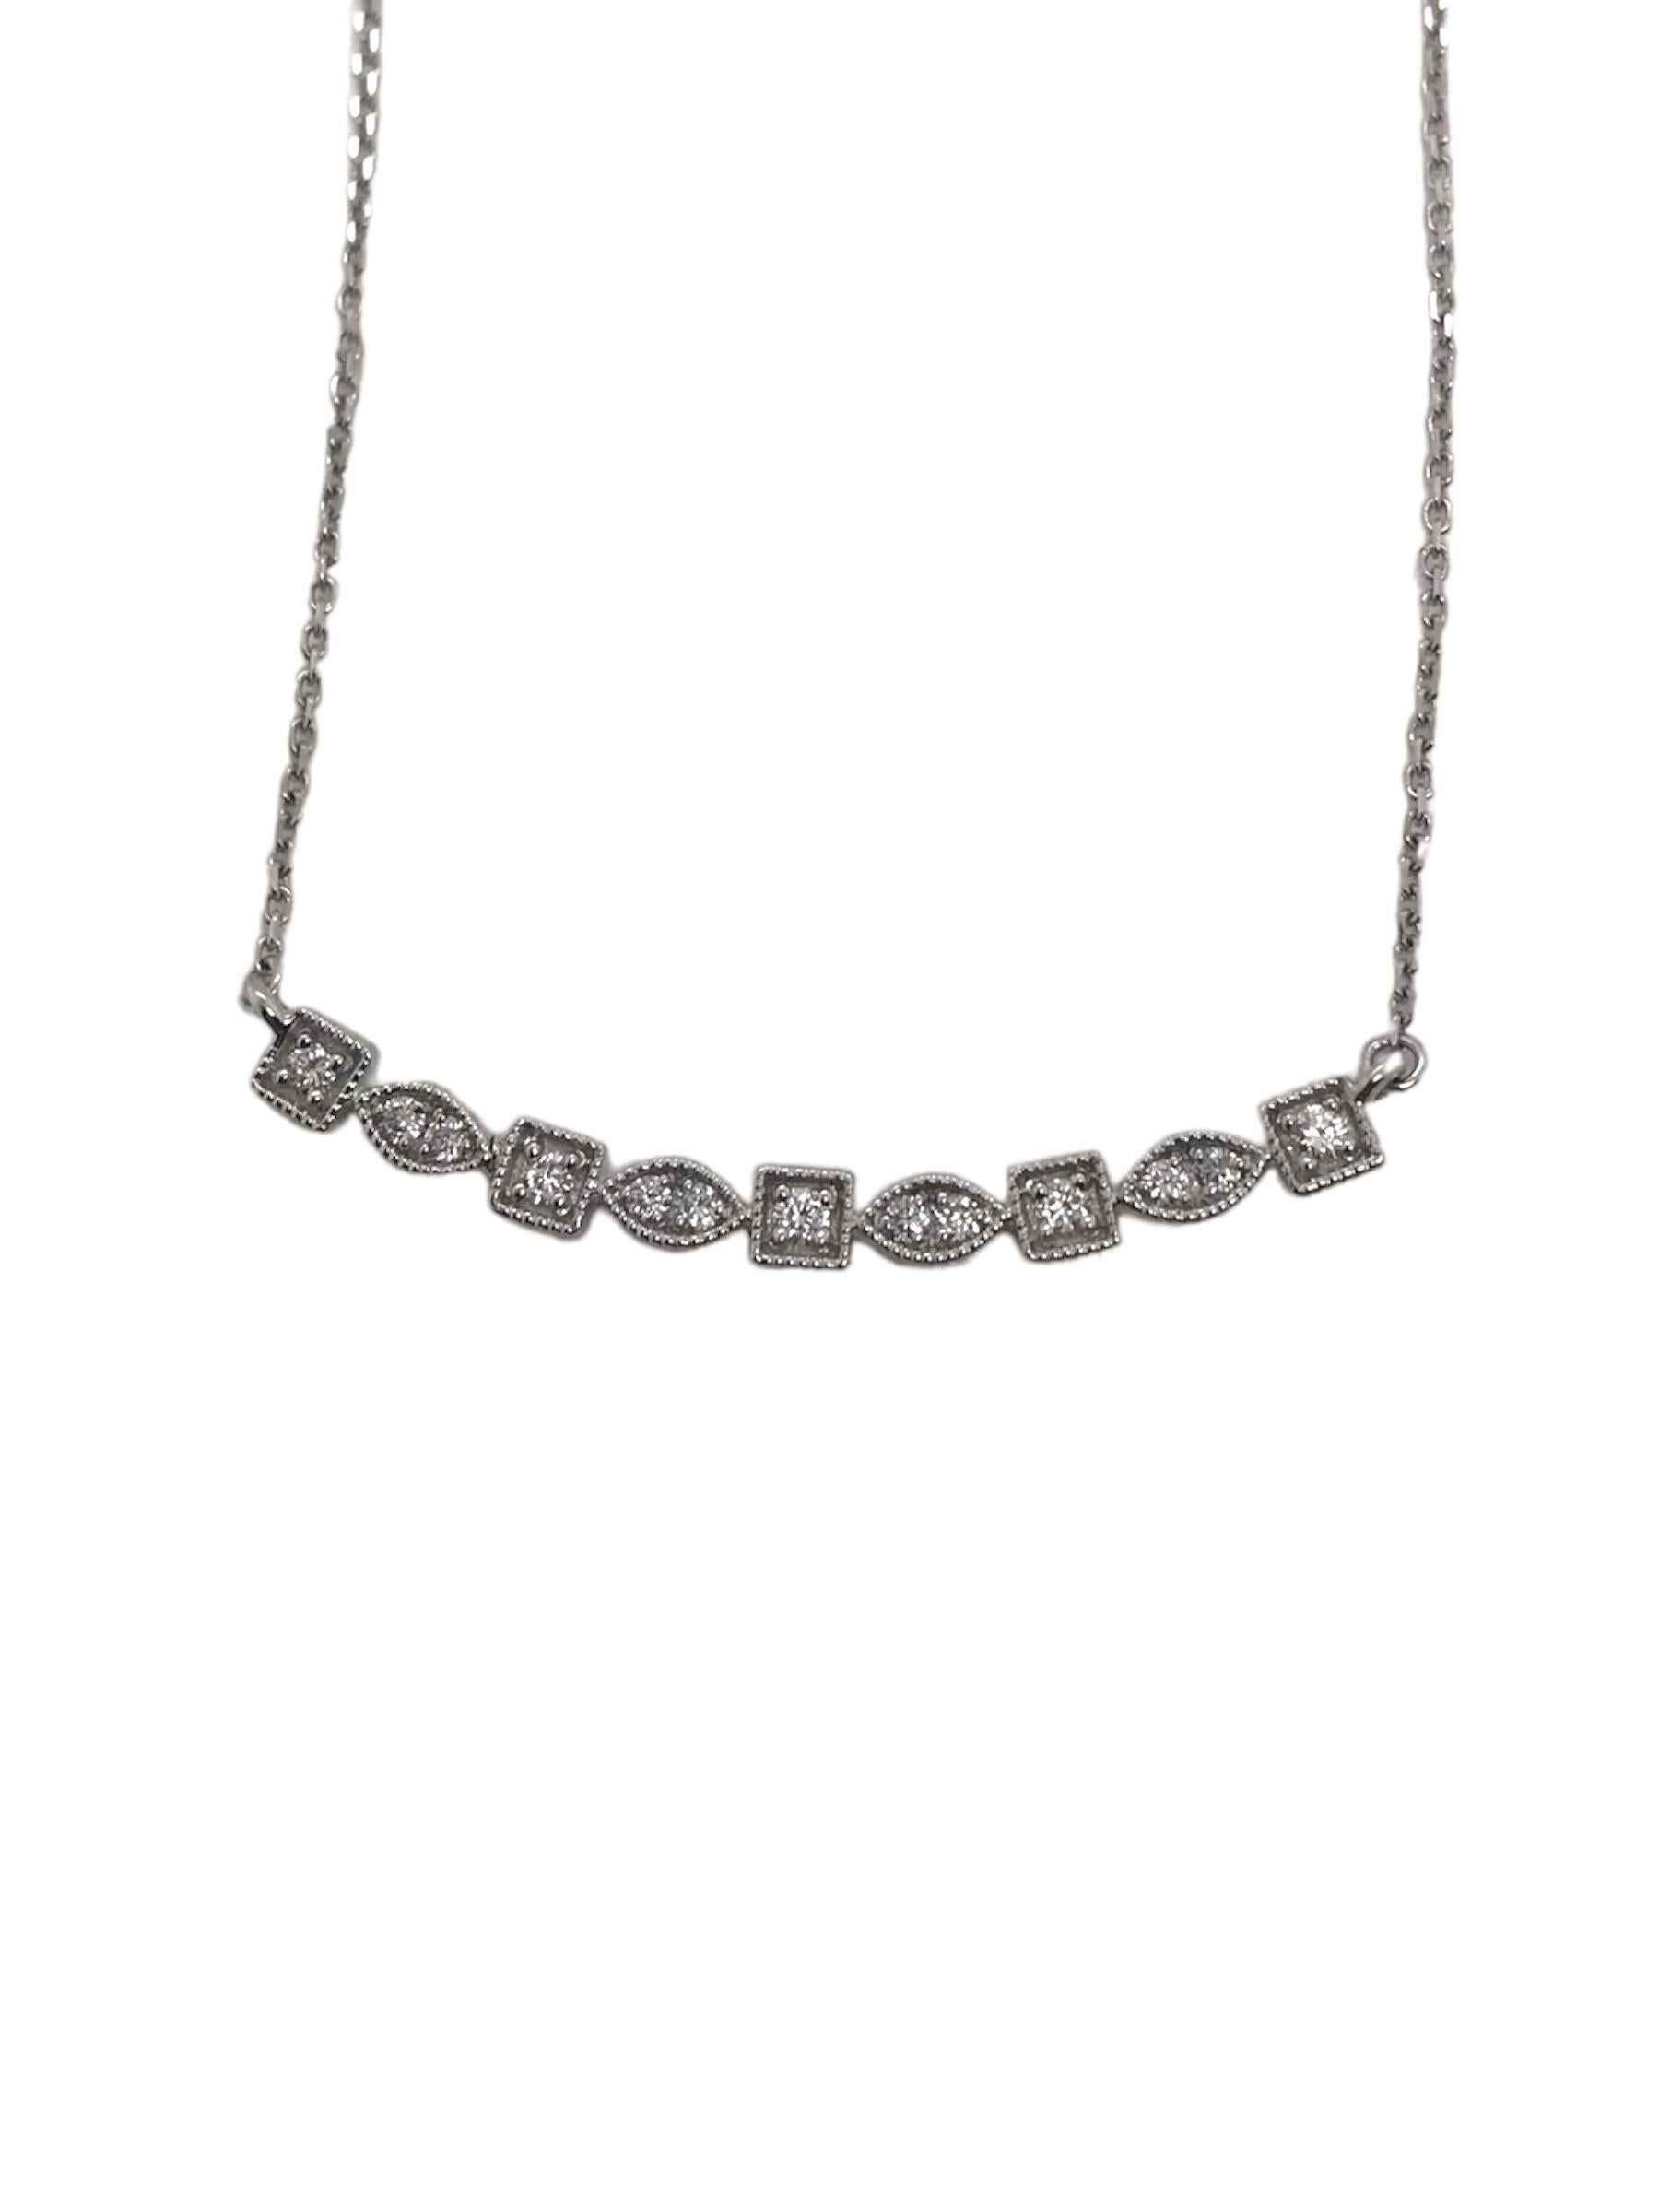 Simple yet stunning!!
This beauty is absolutely perfect for any occasion.

Necklace Details
Material: 14K White Gold
Chain Length: 20 Inches
Weight: 2.8 Grams
Bar Width: 3.15mm

Diamond Details
13 - 1.4mm Round Brilliant Cut Diamonds

Item: 768TMV9